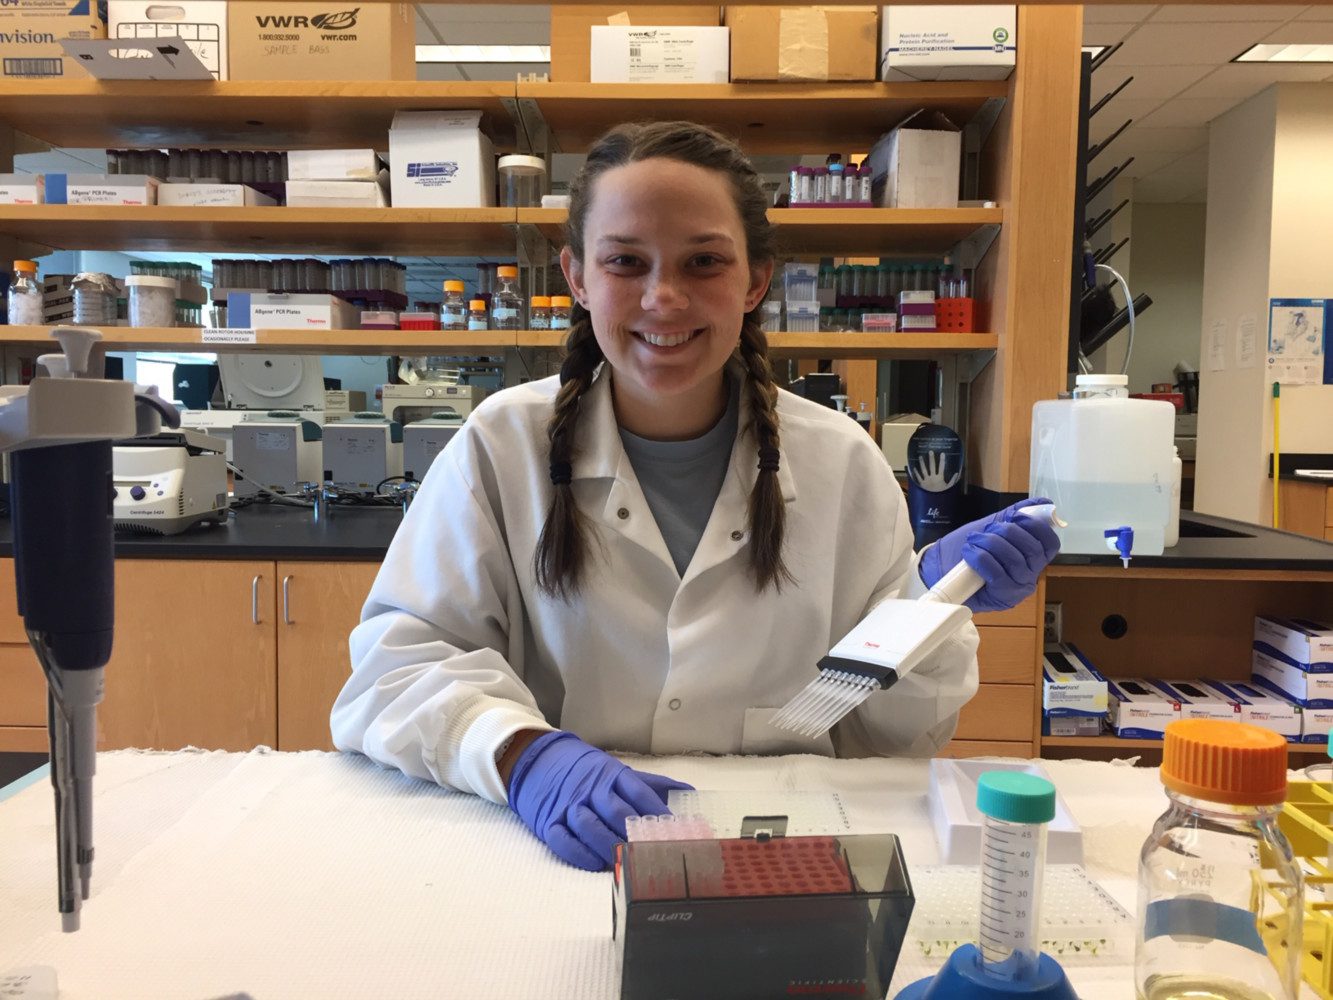 Clemson student Texanna Miller poses in the lab.